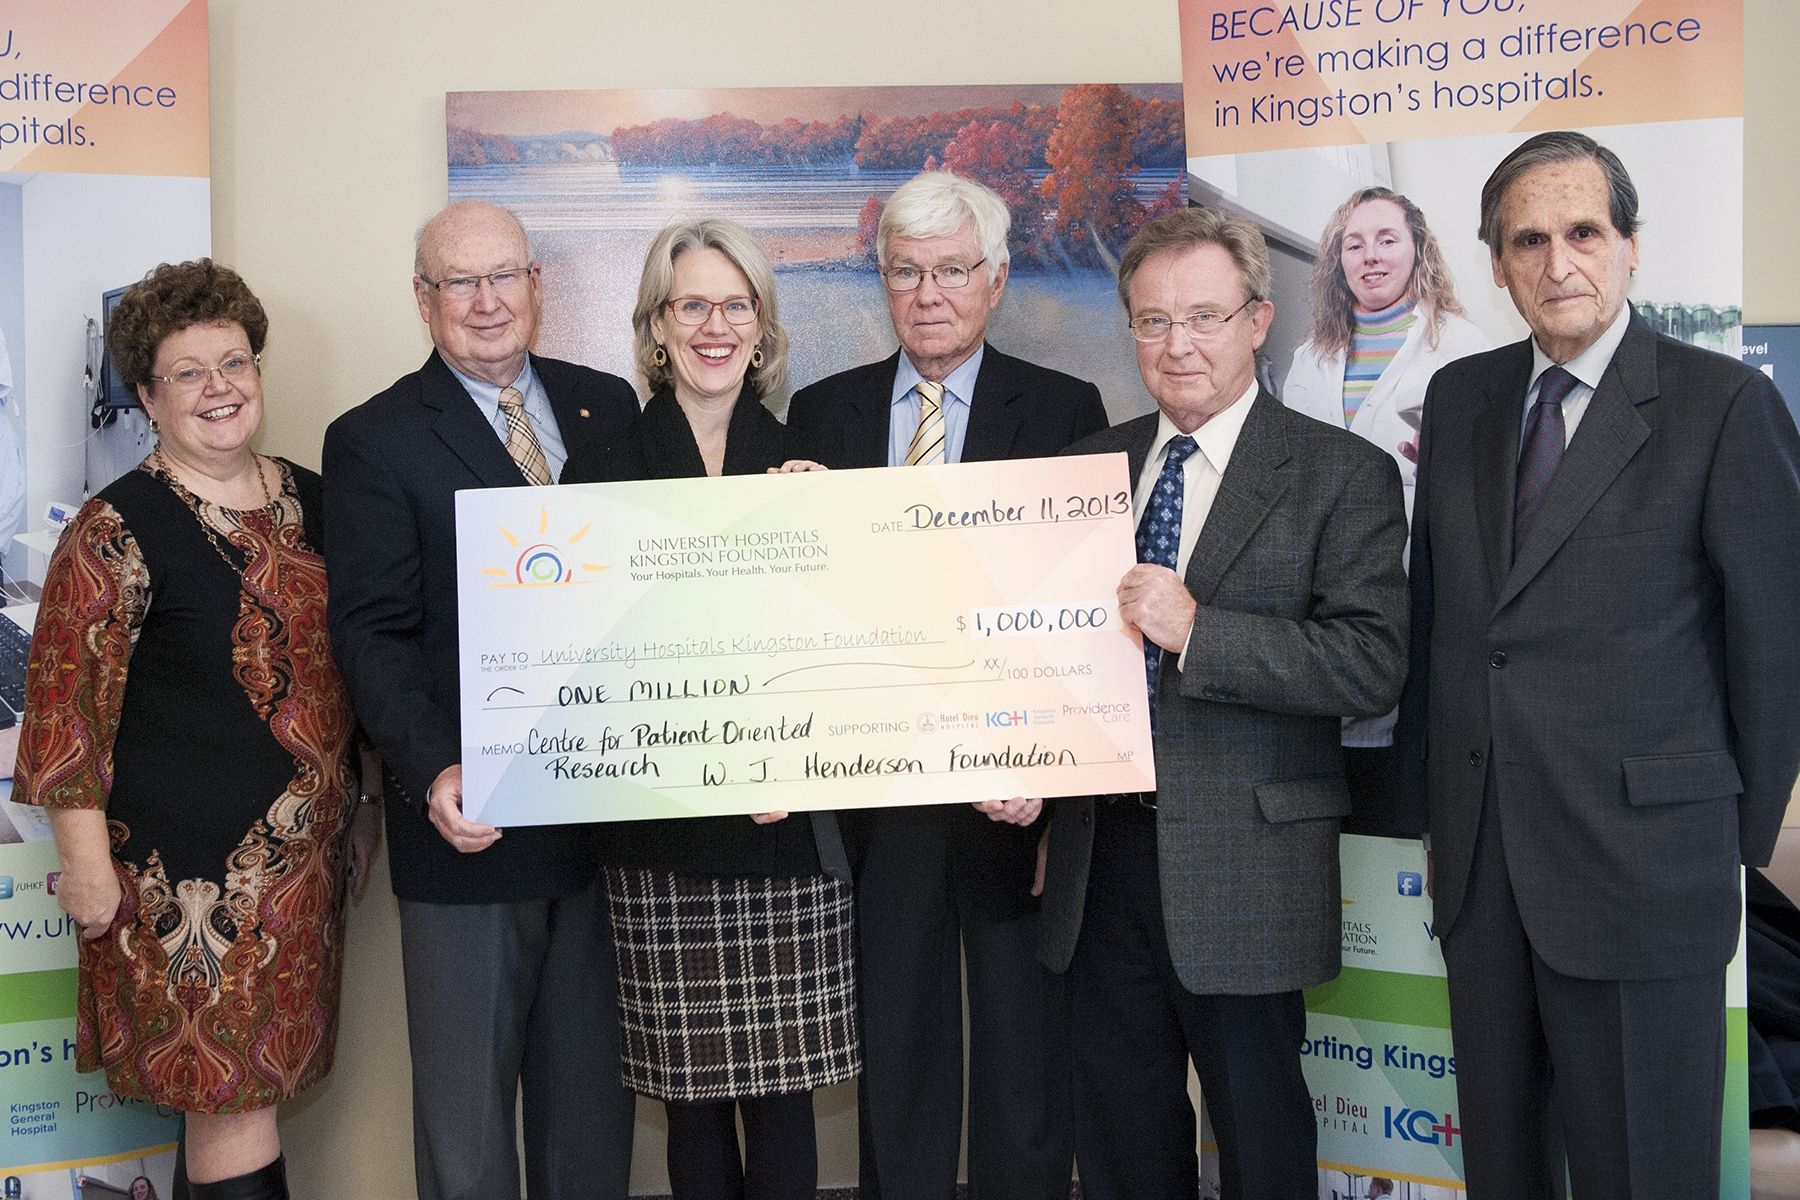 Members of the W. J. Henderson Foundation present a $1 million cheque to KGH. (left to right) Denise Cumming Executive Director, UHKF; Ian Wilson, Co-chair UHKF Centre for Patient-Oriented Care Development Council; CEO Leslee Thompson; David Pattenden, Director W. J. Henderson Foundation; Dr. Roger Deeley, VP of Health Sciences Research; Michael Hickey, VP W. J. Henderson Foundation.